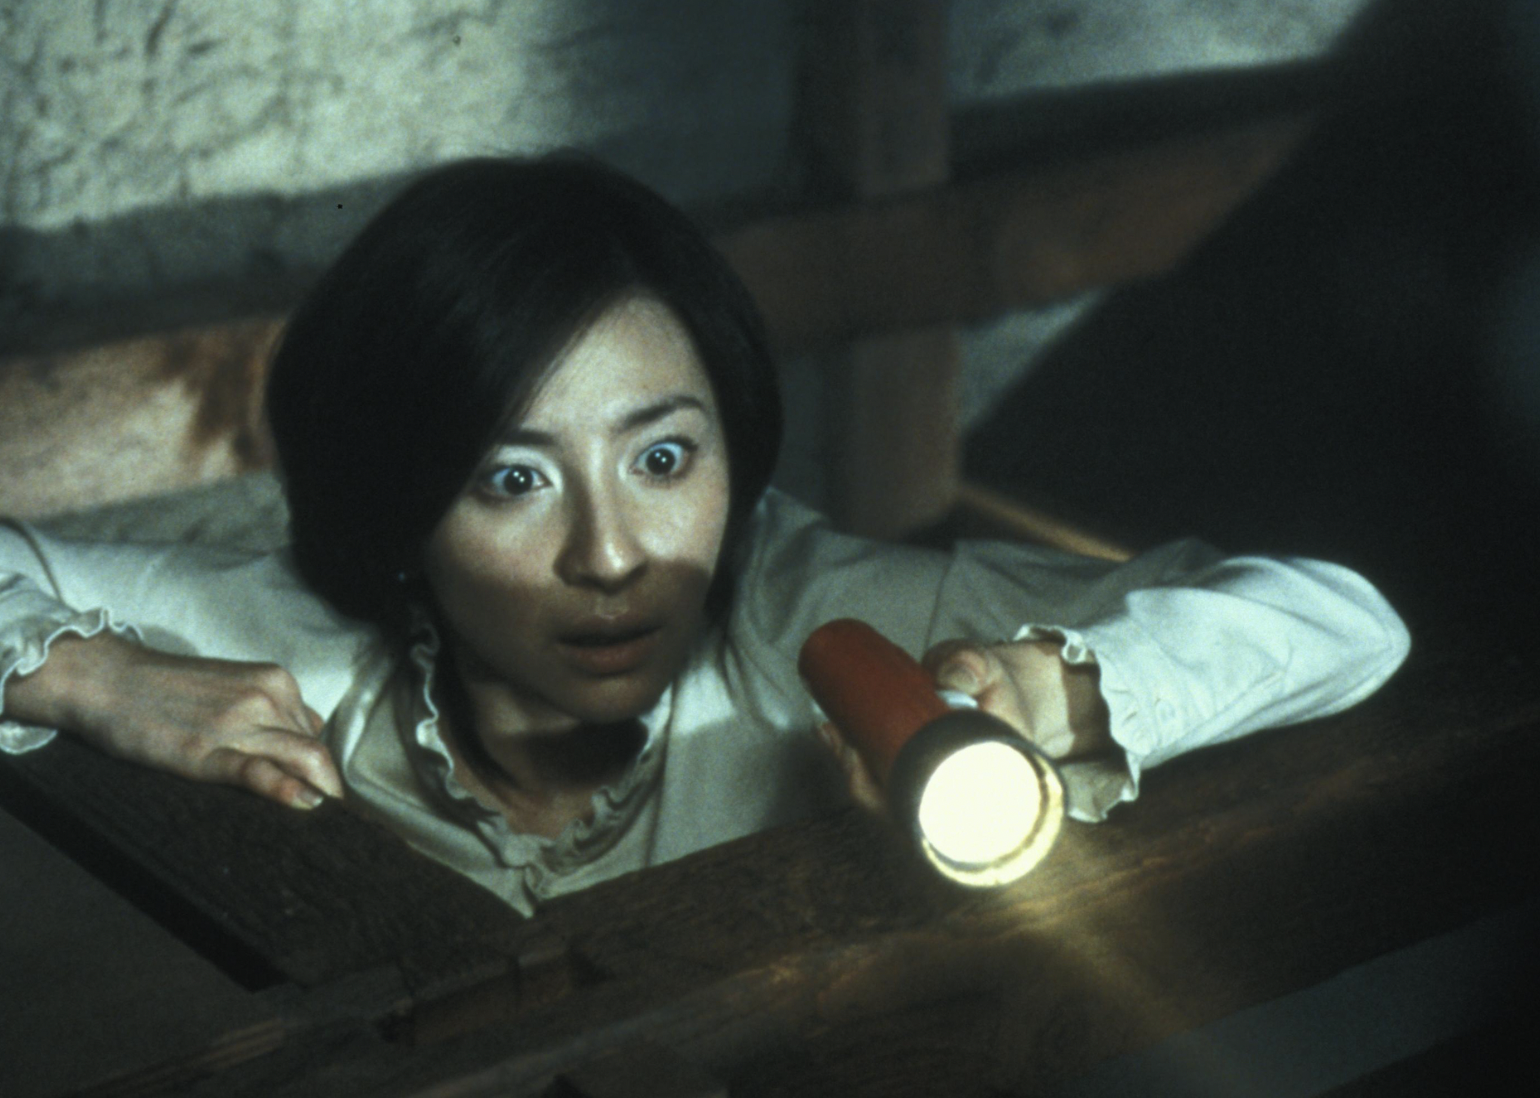 Megumi Okina in "Ju-on: The Grudge"